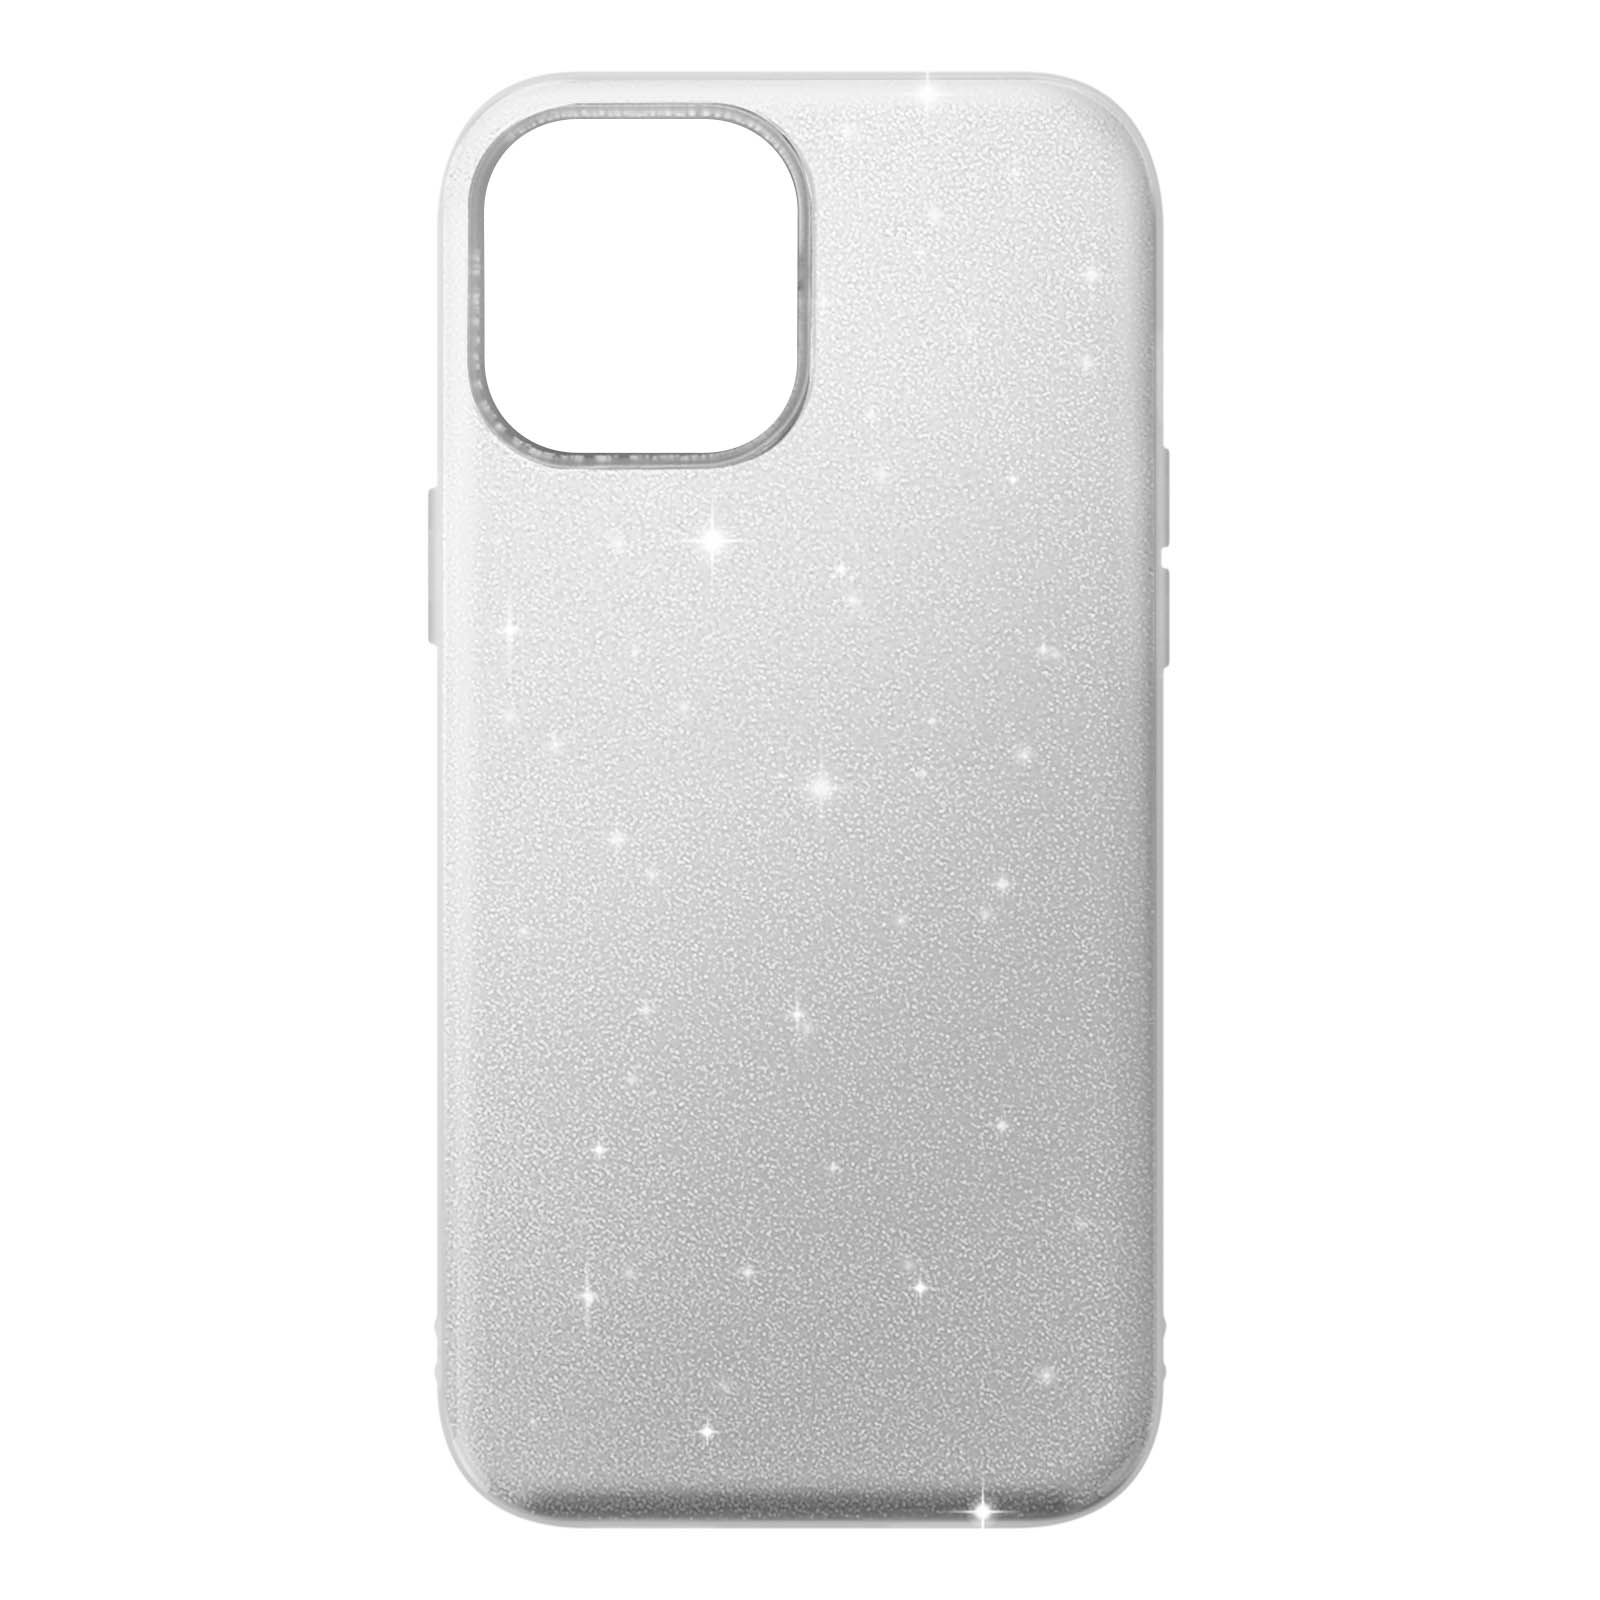 Apple, 12 Series, Pro iPhone Silber Max, Papay AVIZAR Backcover,